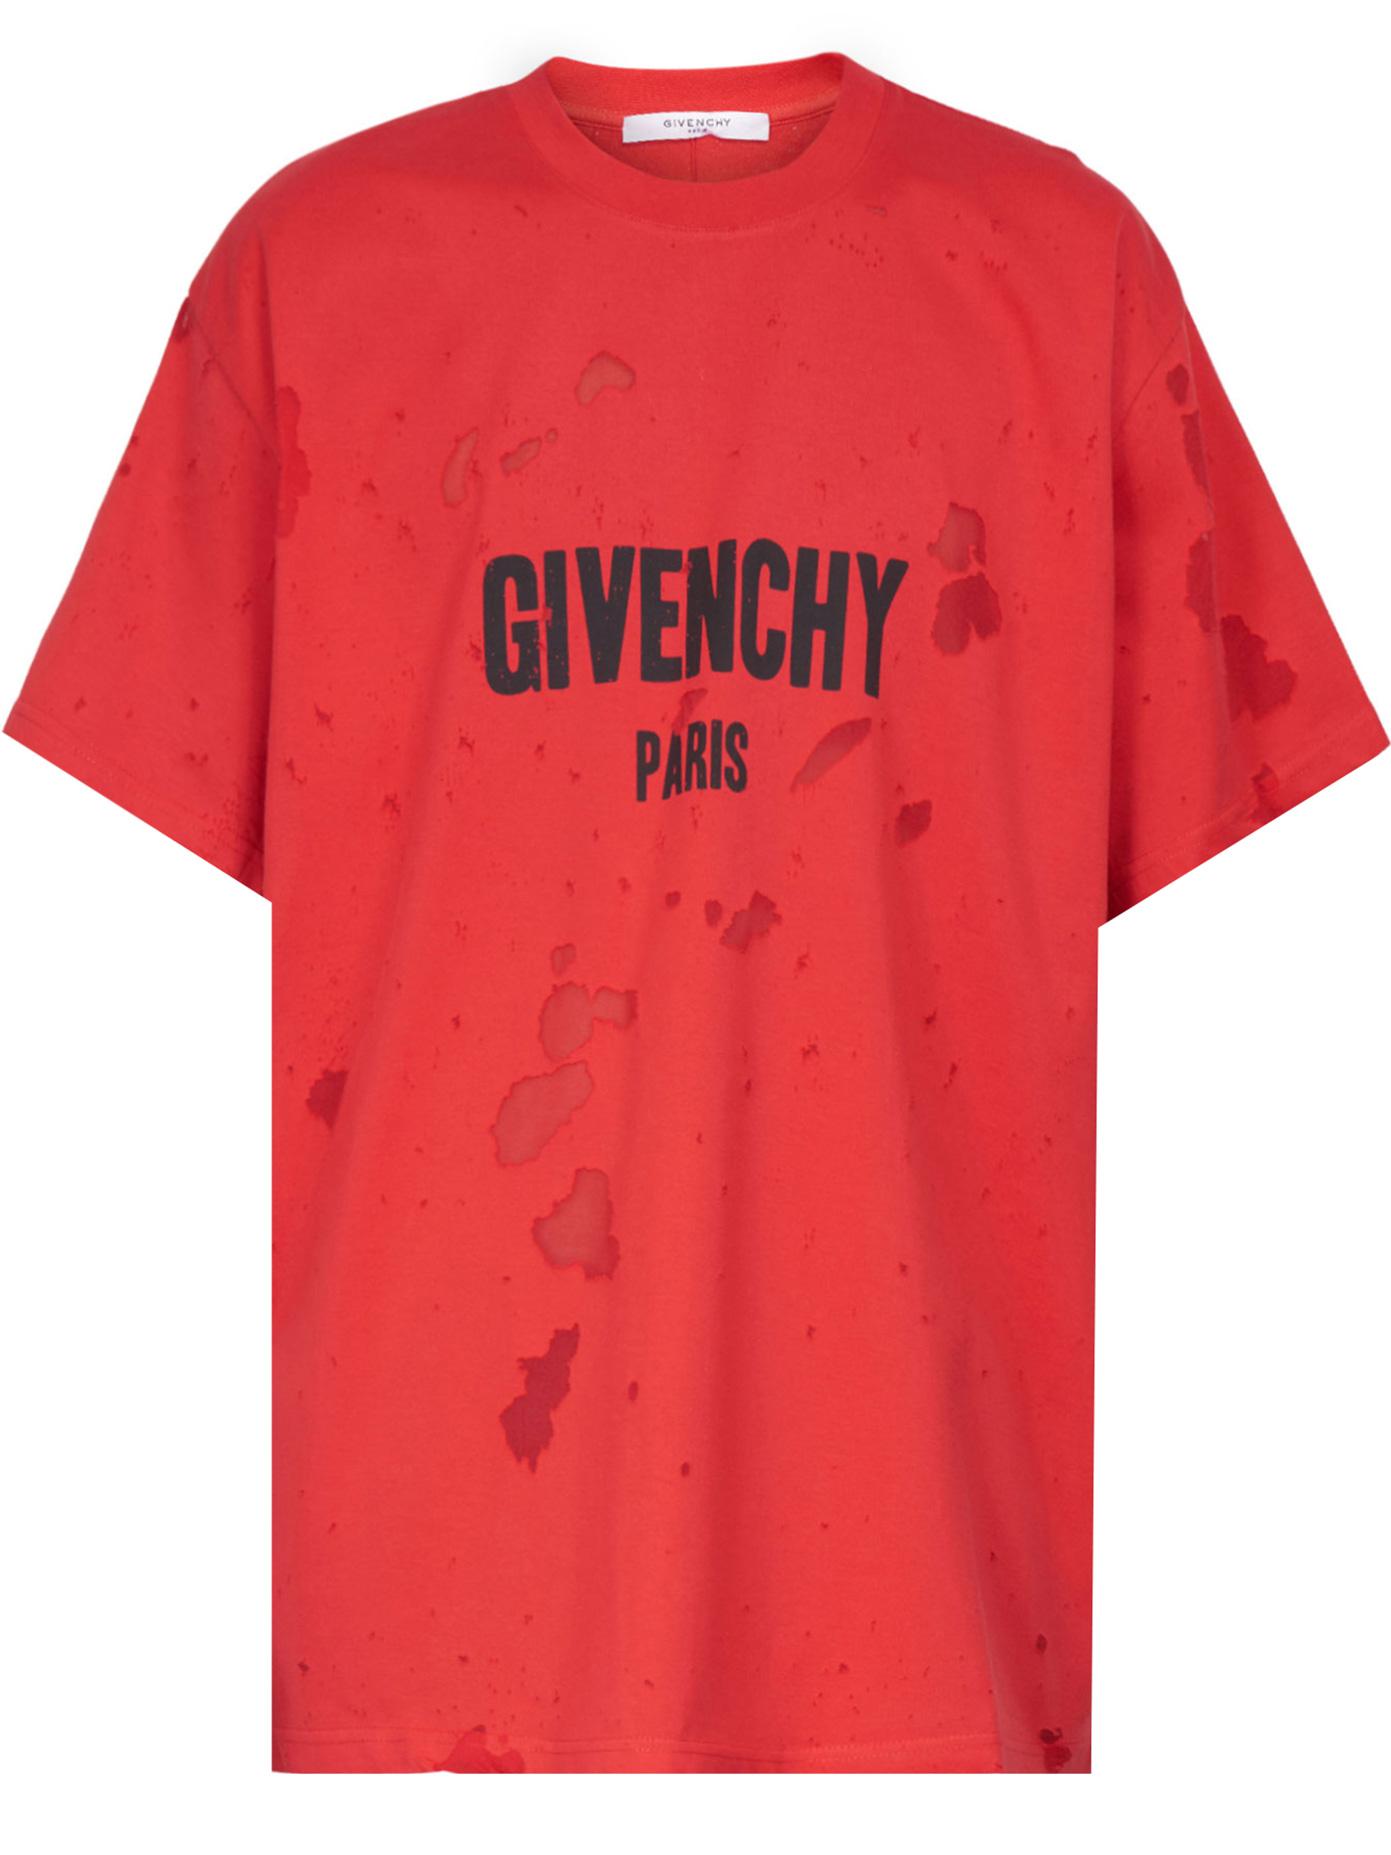 Givenchy Cotton Red Distressed Logo T-shirt for Men - Lyst